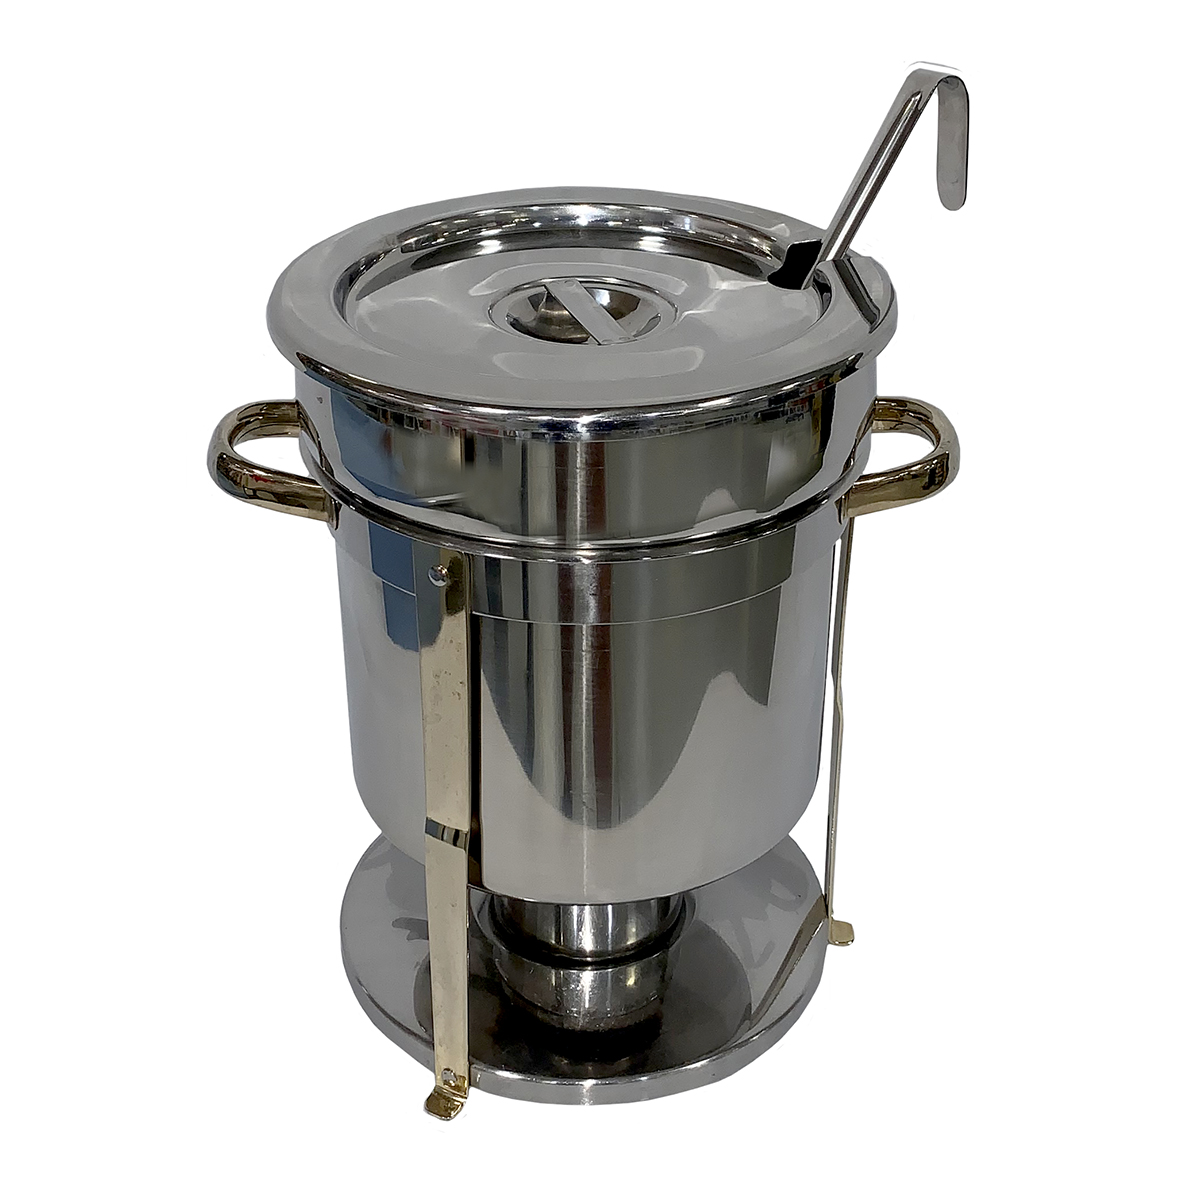 Soup Chafer 7qt With Brass Trim With 3oz Ladle | Party Rental Equipment ...